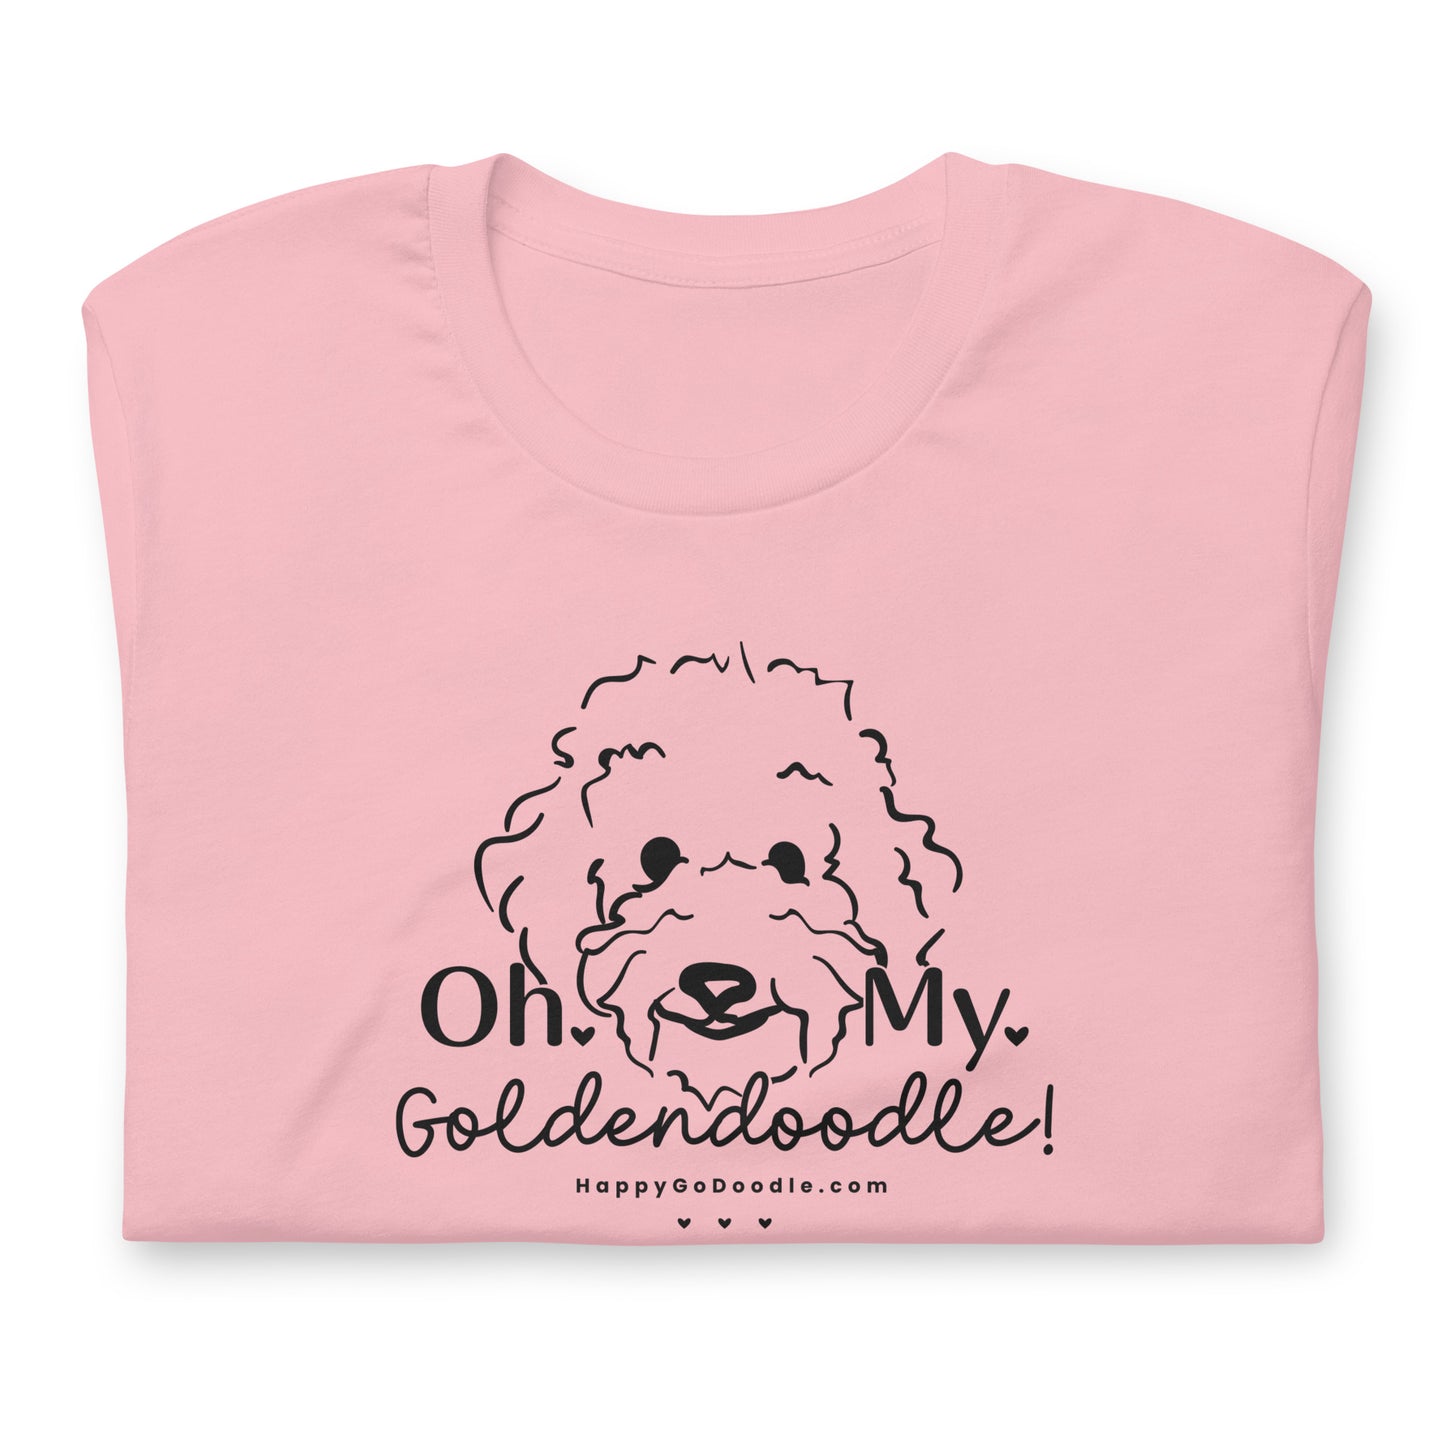 Goldendoodle t-shirt with Goldendoodle face and words "Oh My Goldendoodle" in pink color